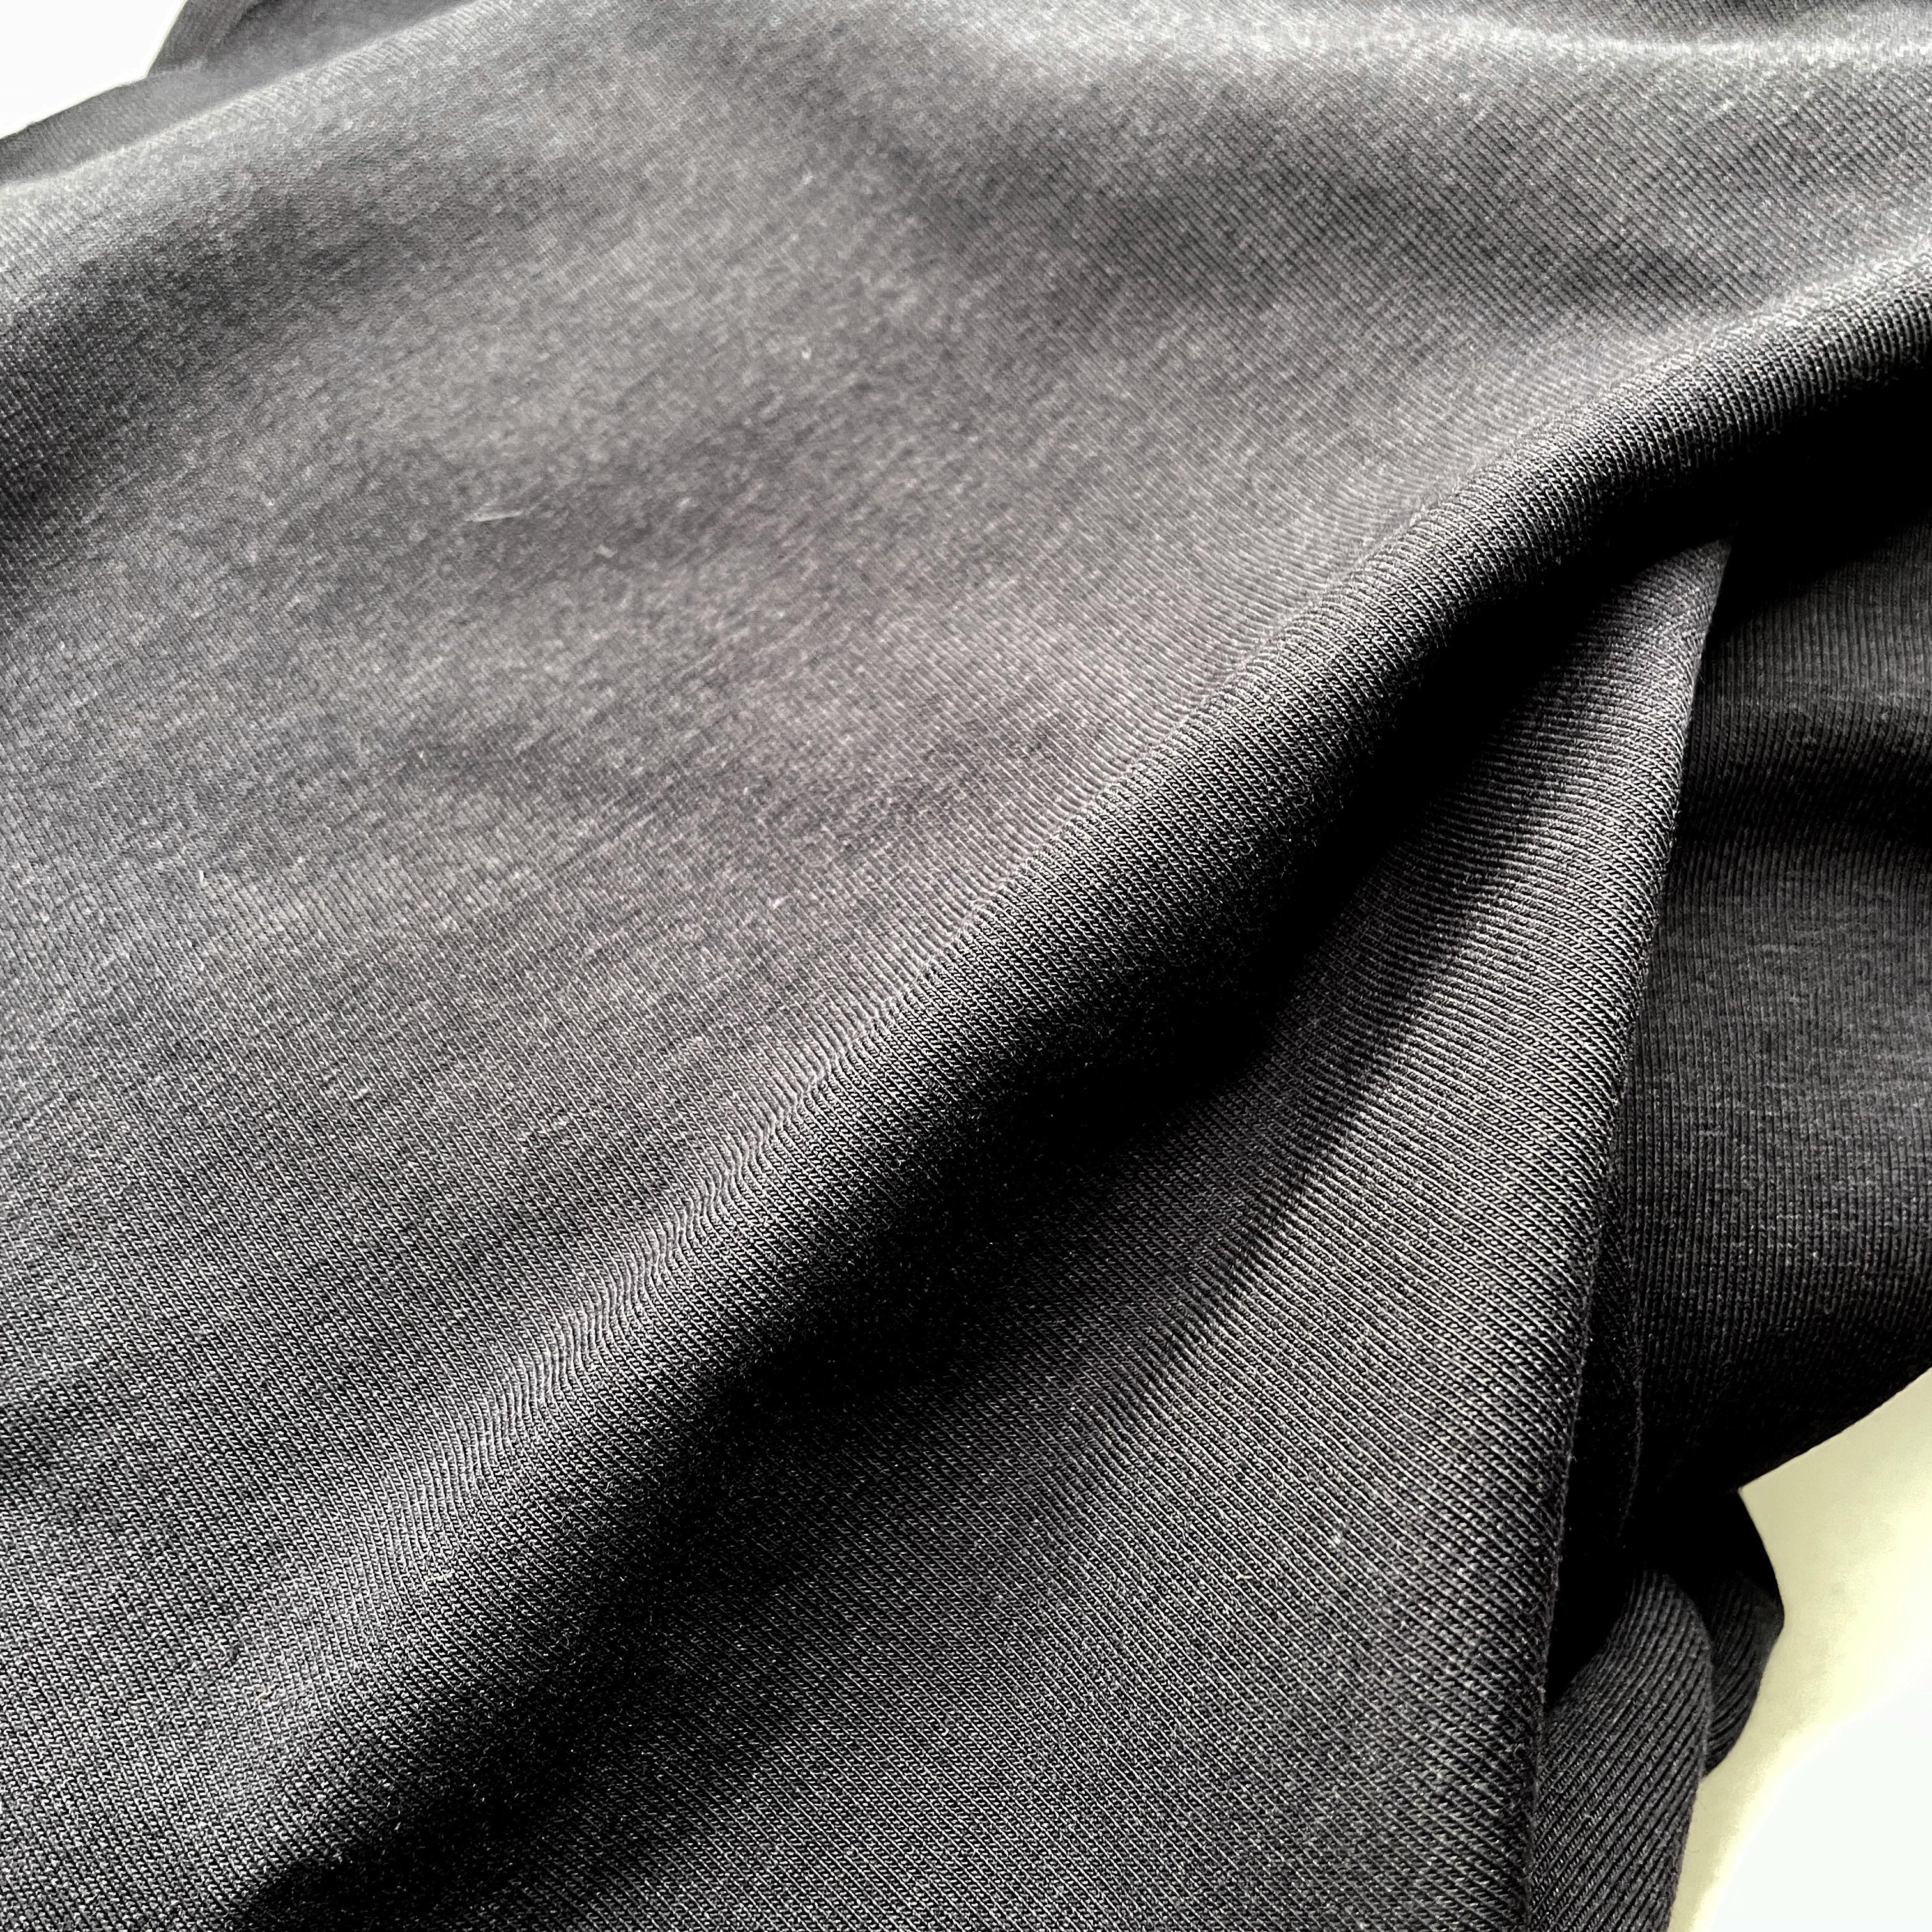 Jersey Fabric - Heavy Weight 240gsm - Stretch Cotton lycra (TESSA) -  CHARCOAL (Nearly Black) - Hoodie/Leggings/leotards/gym etc